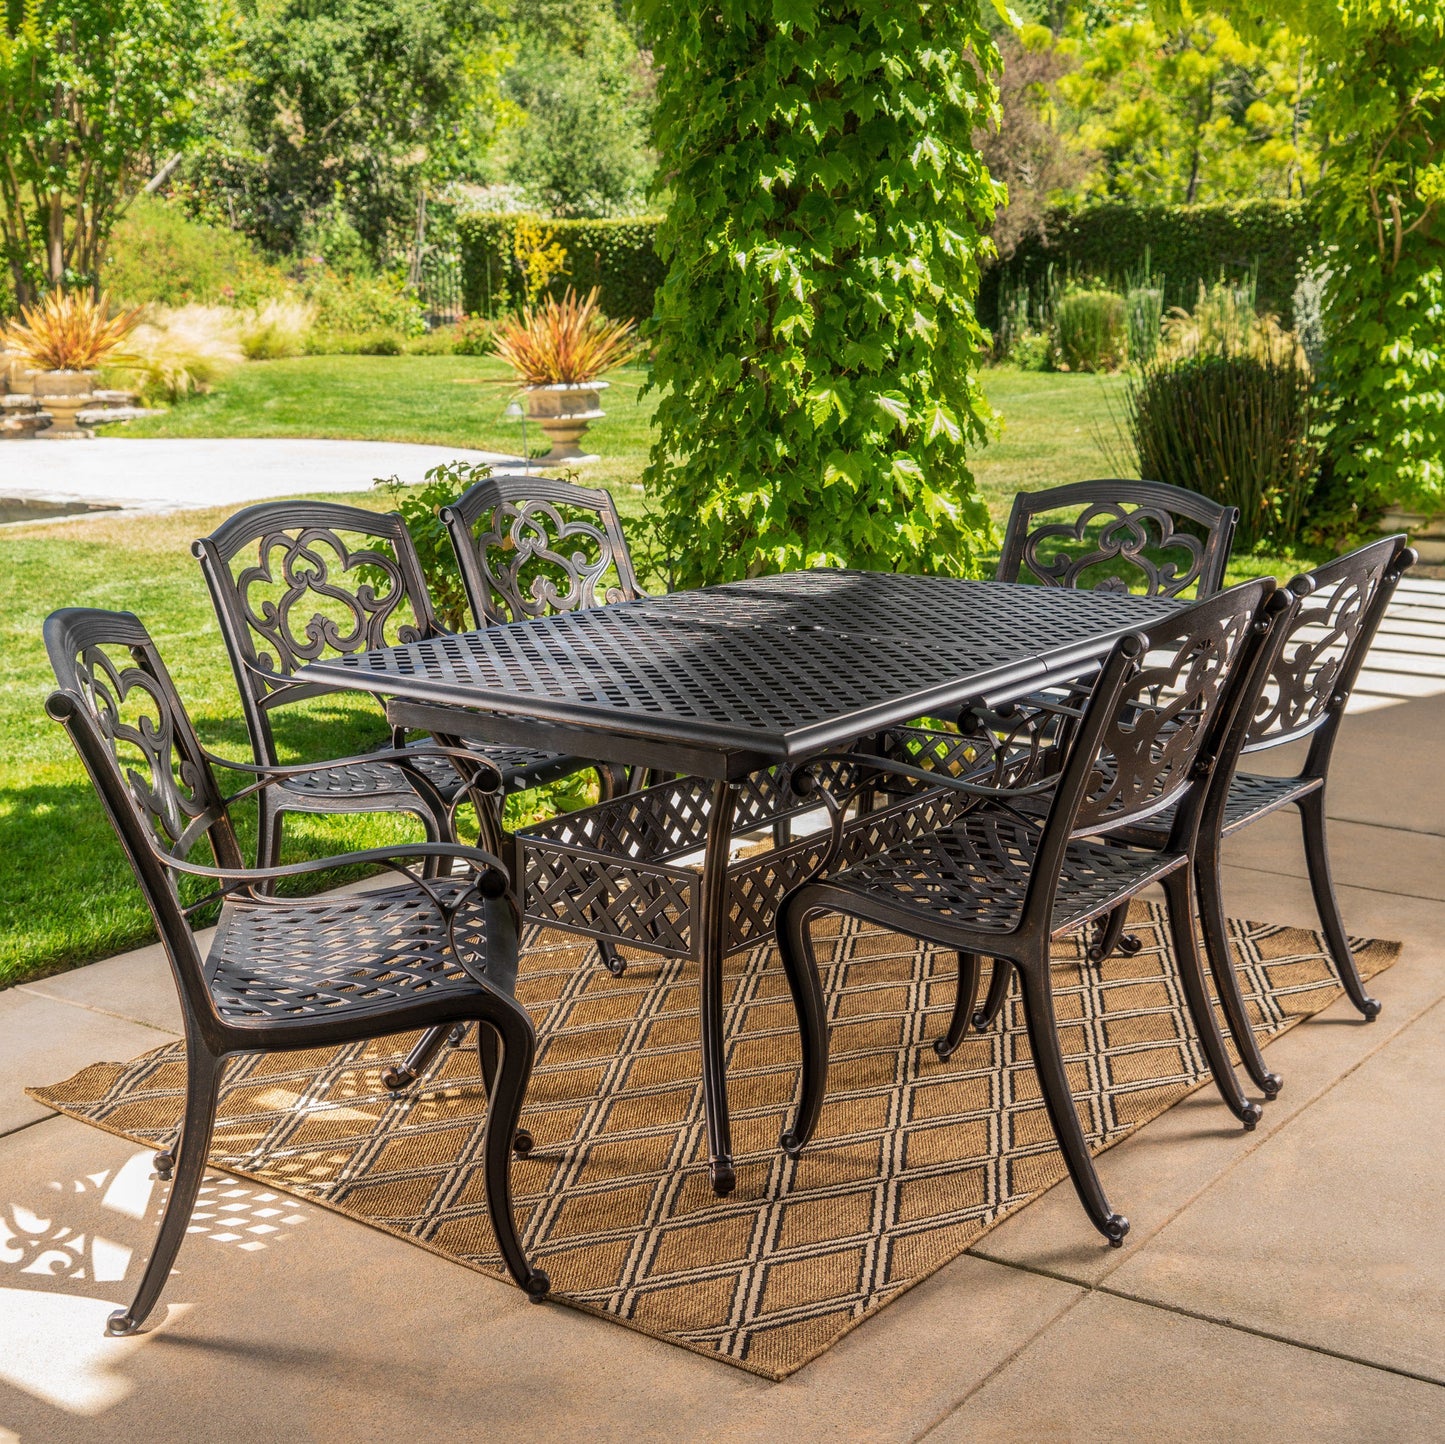 Ariel Outdoor 7 Pc Cast Aluminum Dining Set with Extension Leaf